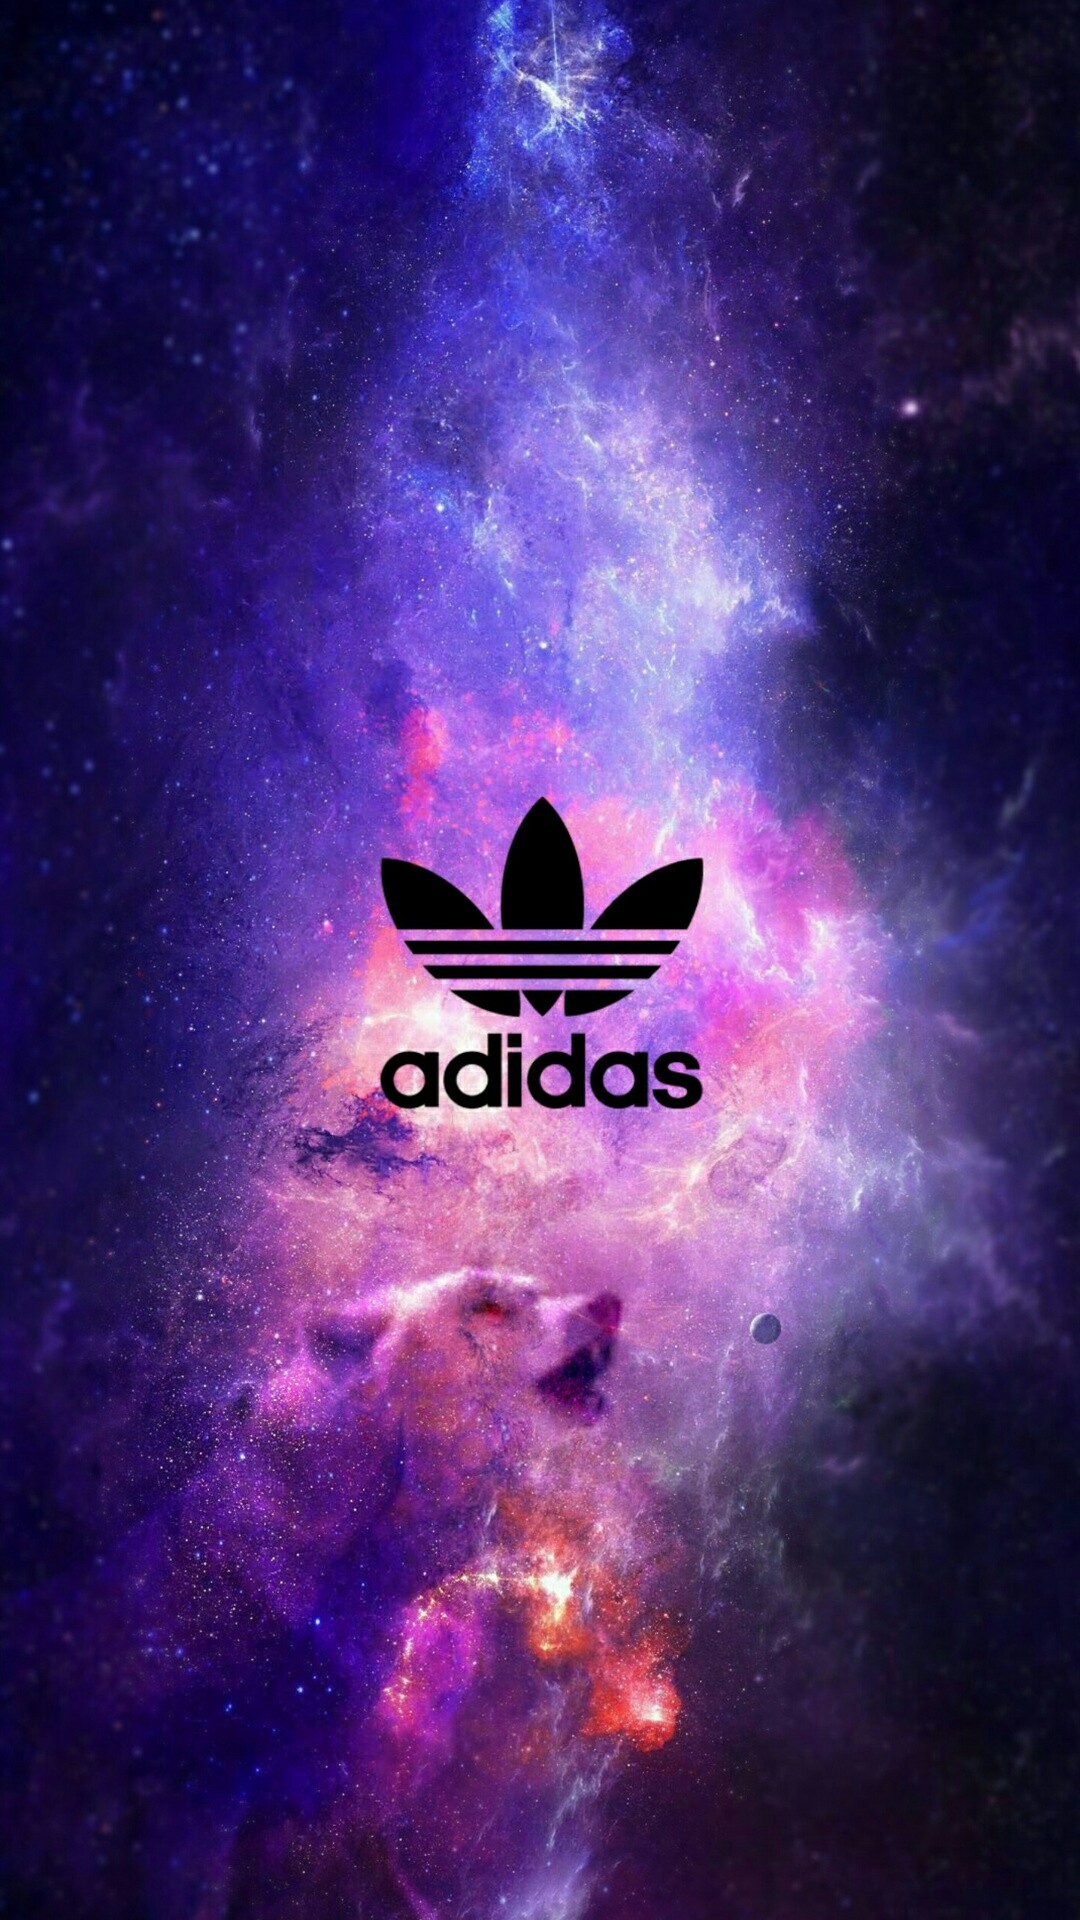 1080x1920 Colorful Adidas Wallpaper Desktop Background Is Cool Wallpapers